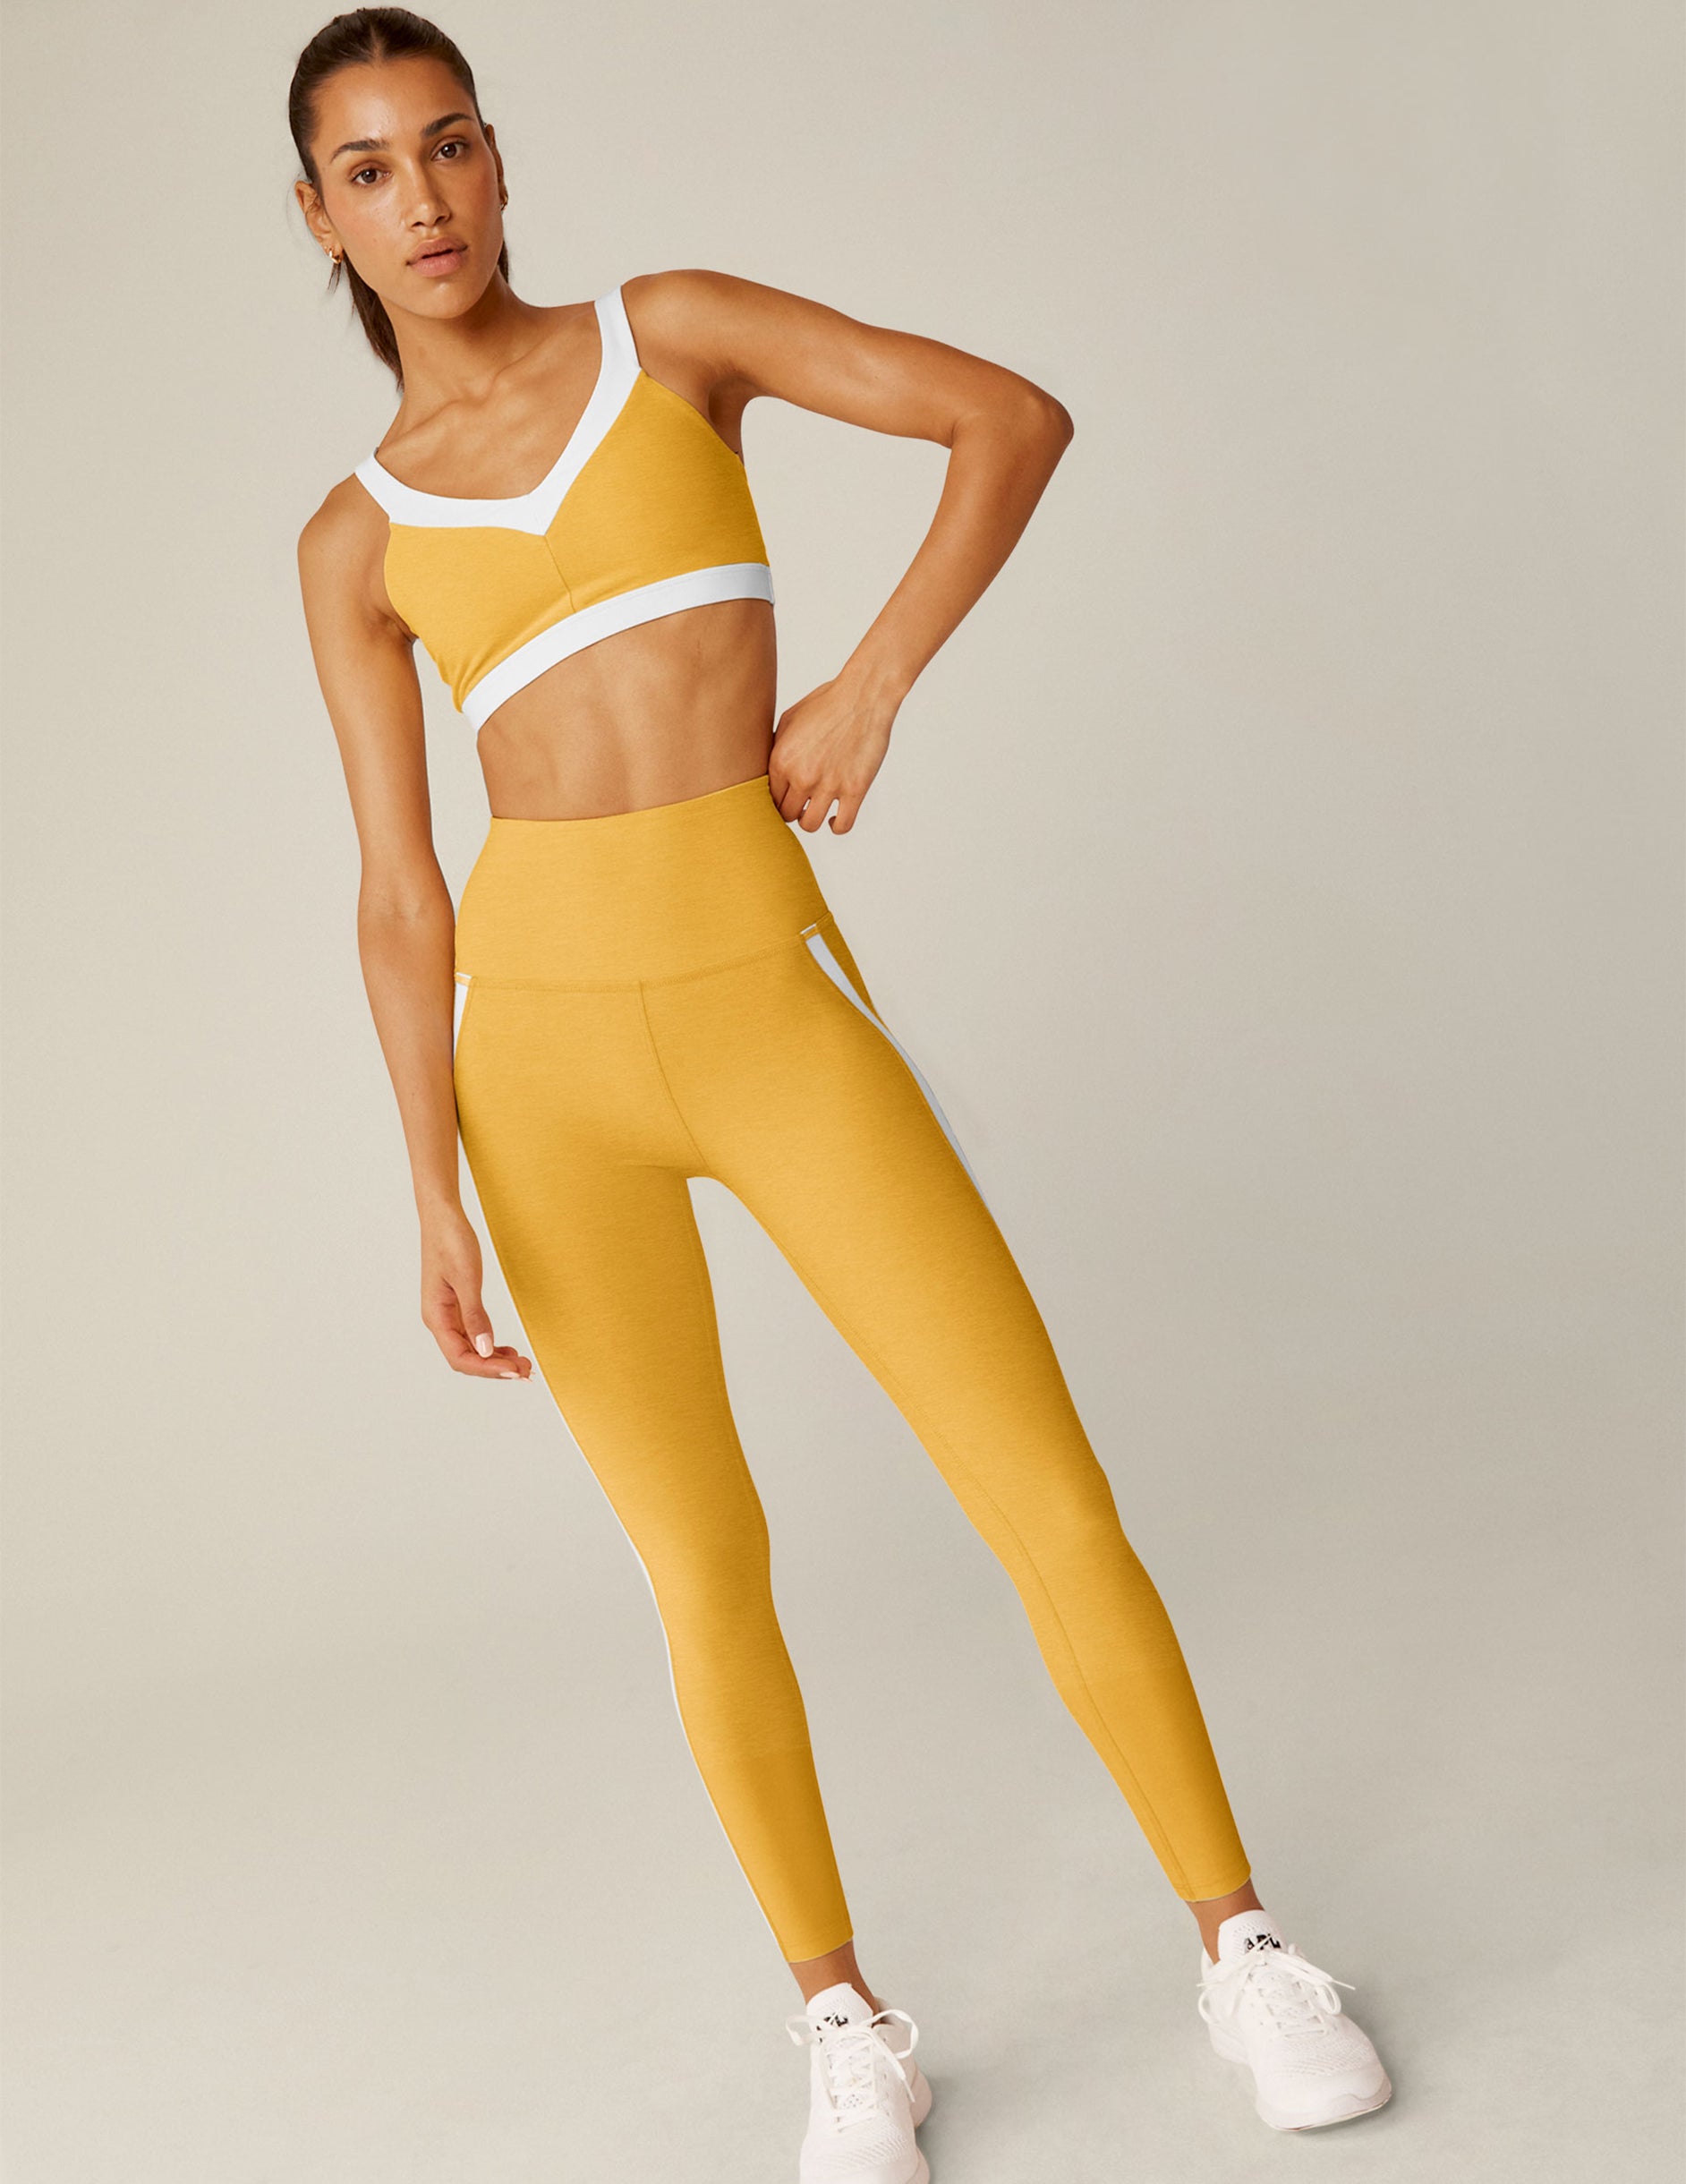 yellow spacedye bra top with white outlining.